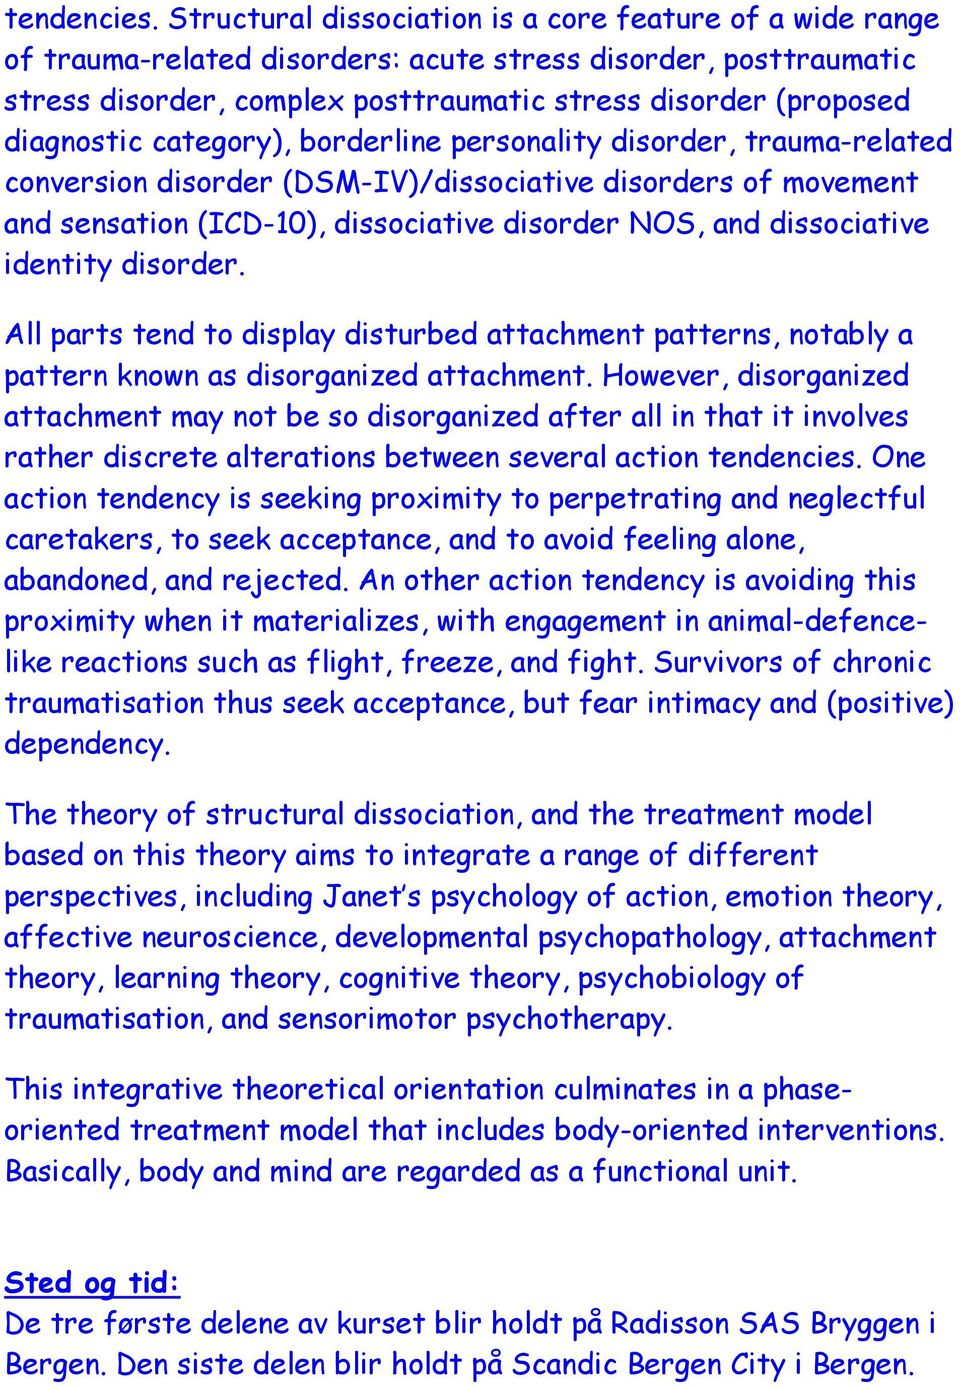 category), borderline personality disorder, trauma-related conversion disorder (DSM-IV)/dissociative disorders of movement and sensation (ICD-10), dissociative disorder NOS, and dissociative identity